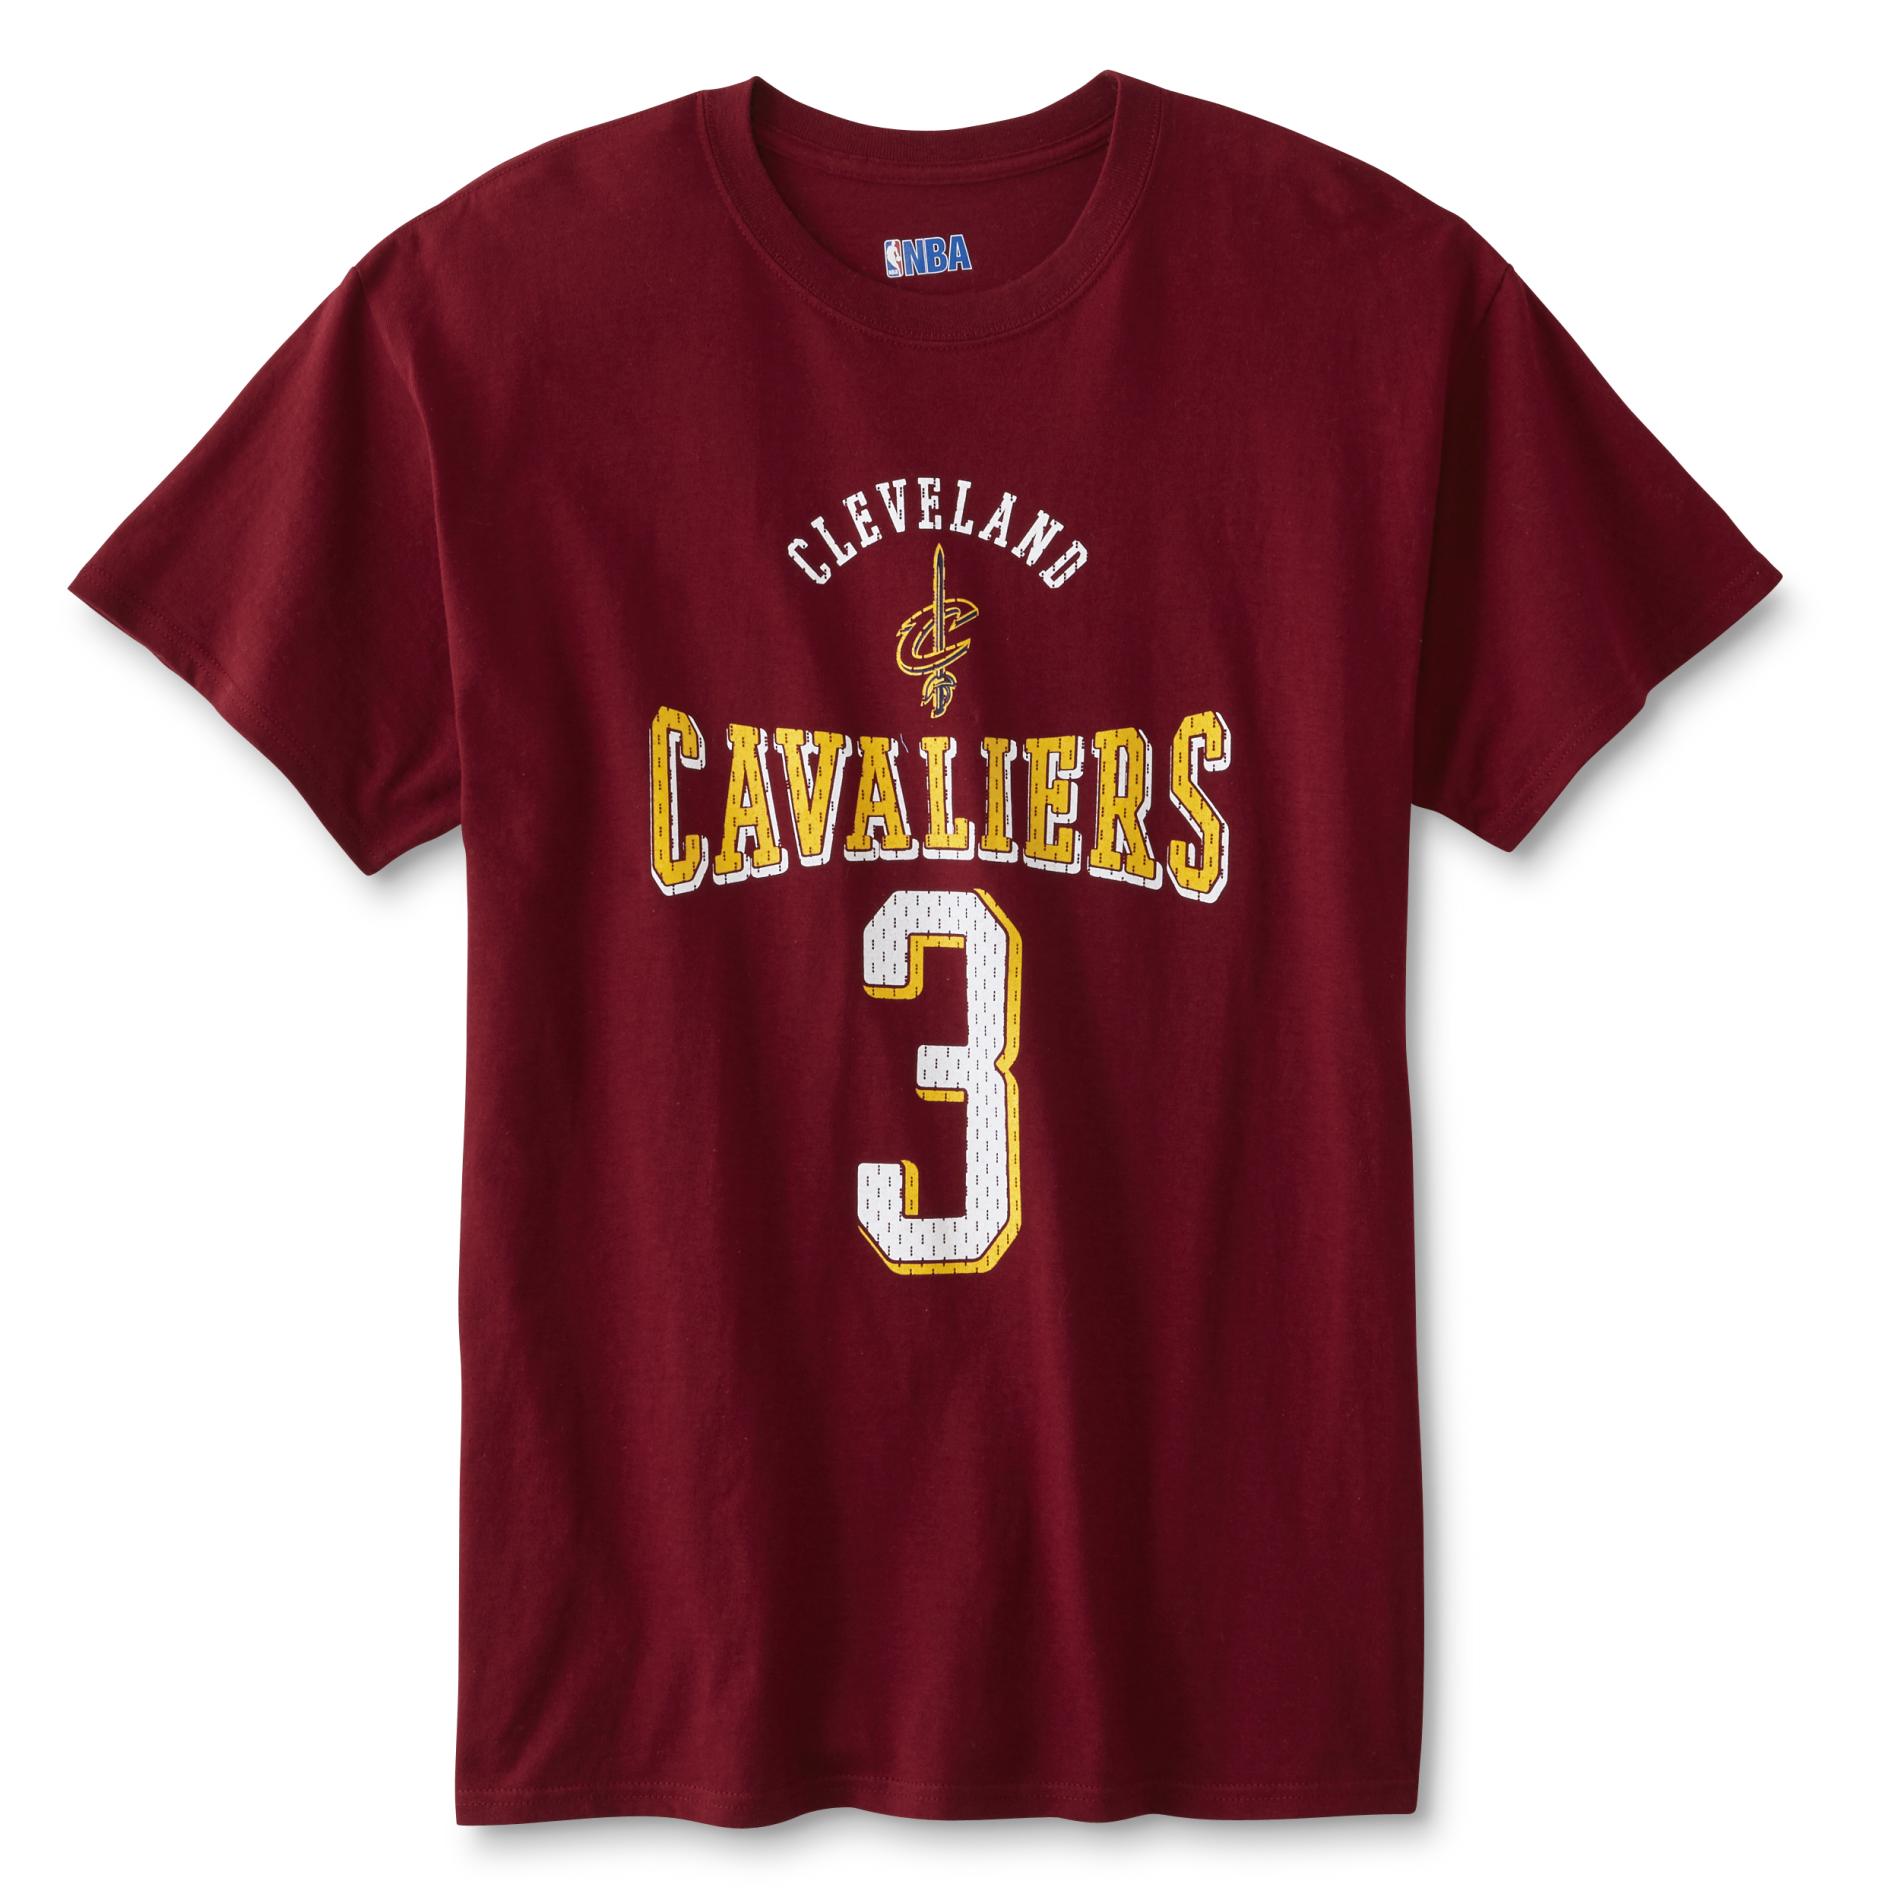 isaiah thomas cavaliers jersey number